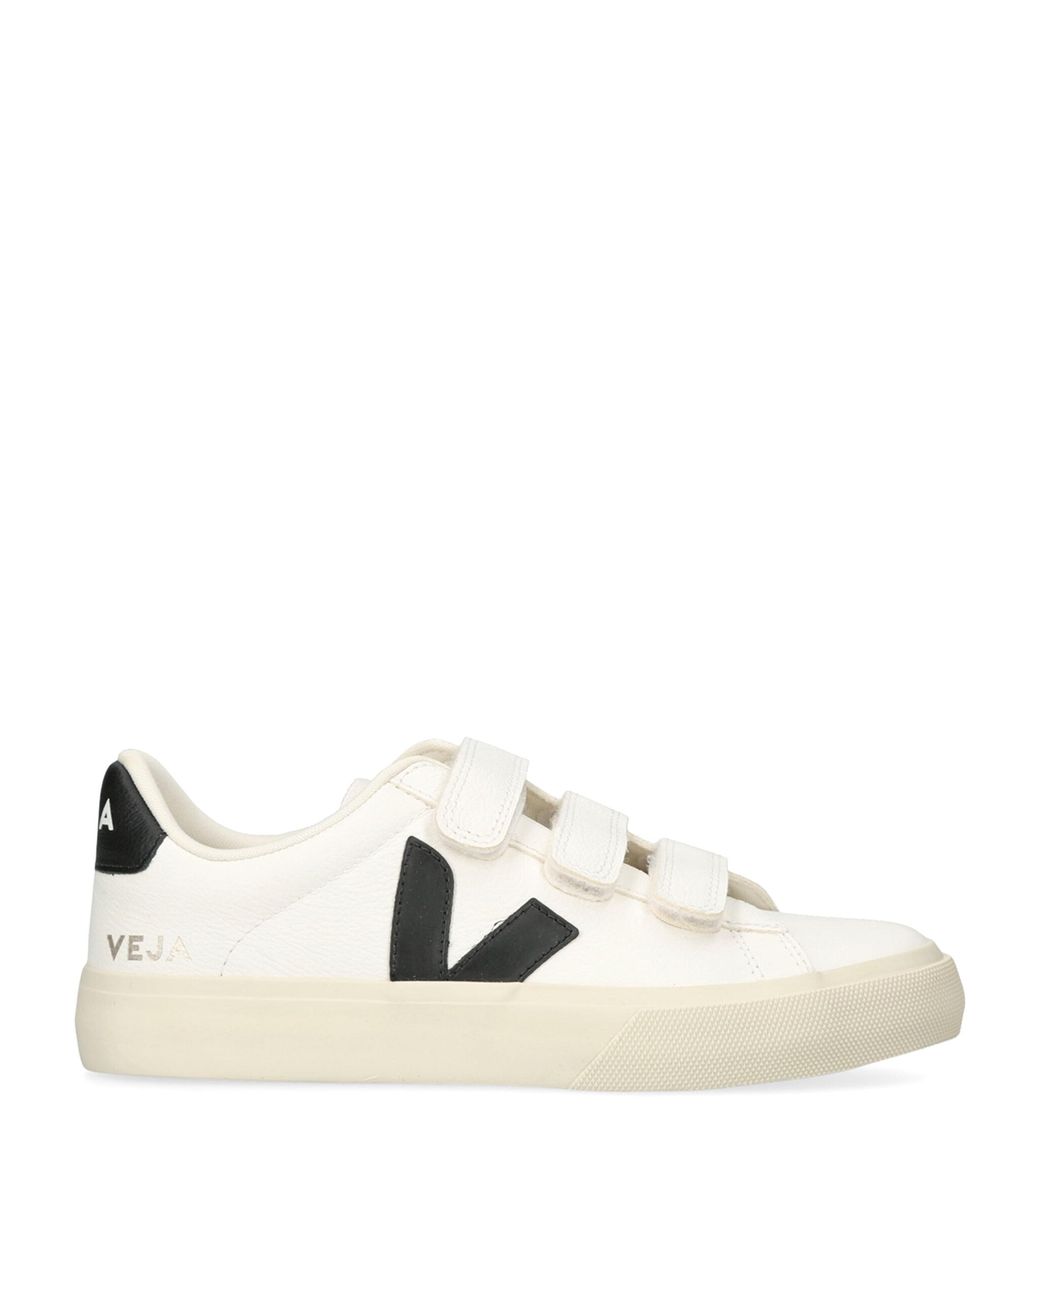 Veja Leather Recife Velcro Sneakers in Natural | Lyst Canada